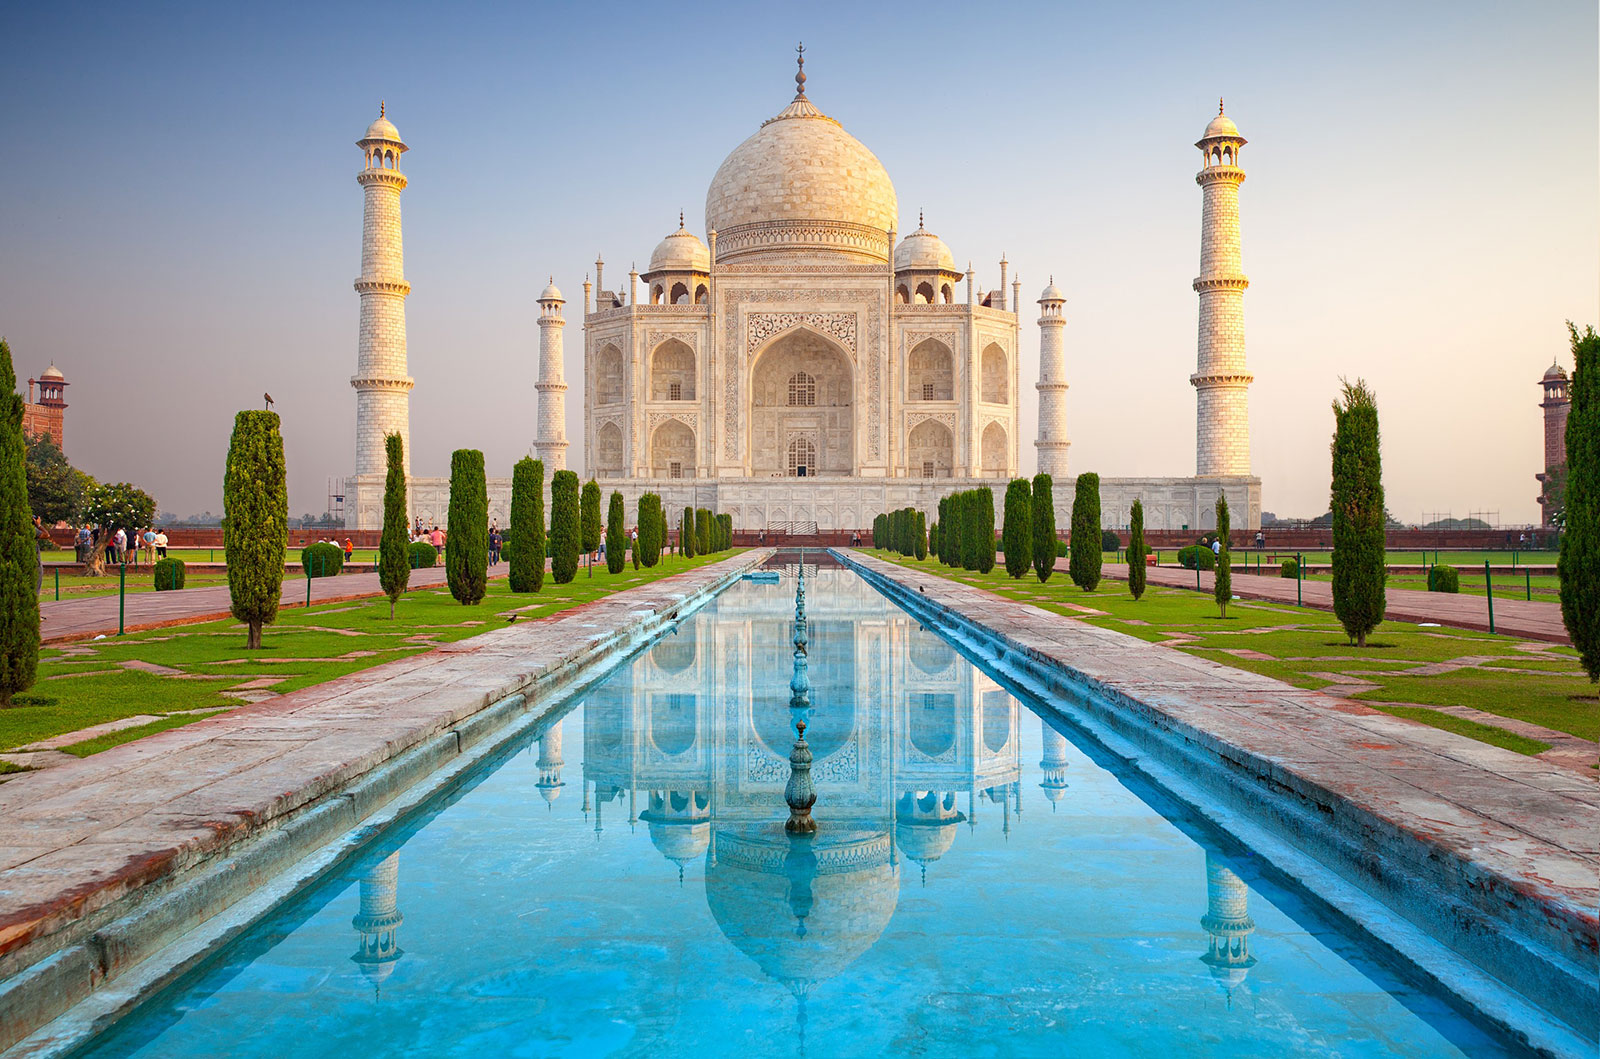 🗺 Most People Can’t Match 20/24 of These Famous Places to Their Country on a Map – Can You? Taj Mahal, India